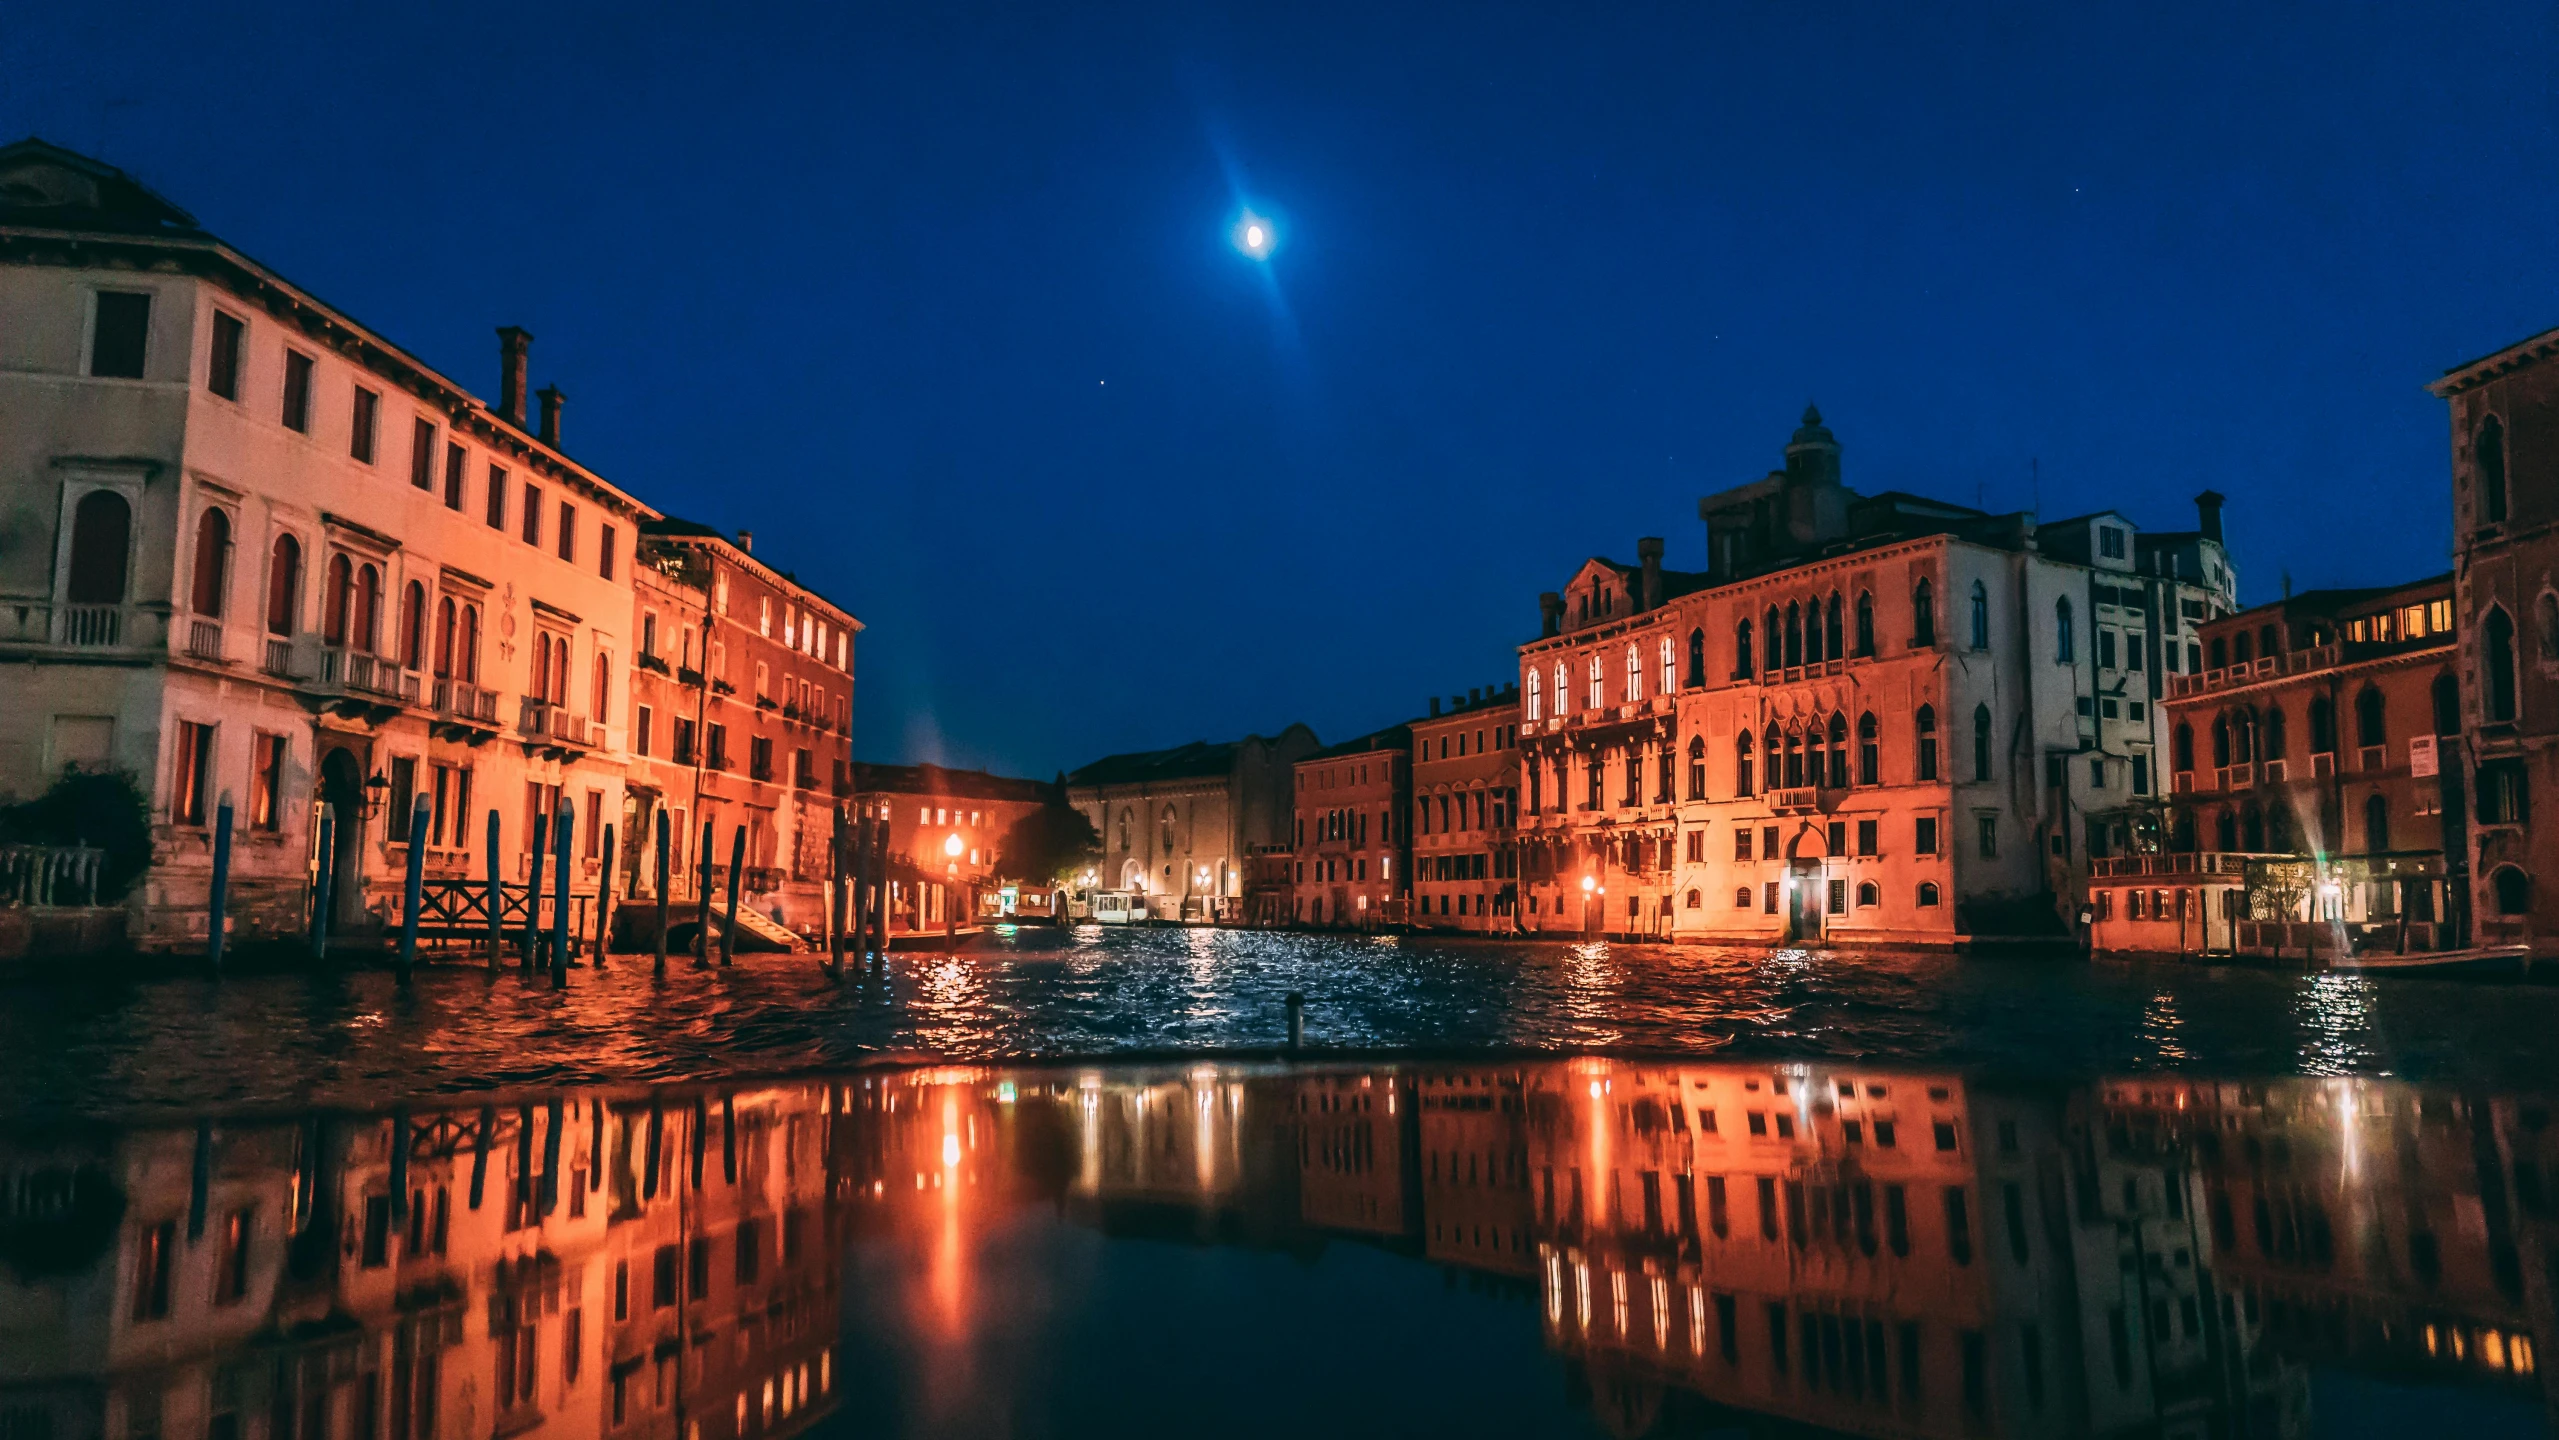 a canal at night with a full moon in the sky, an album cover, pexels contest winner, renaissance, payne's grey and venetian red, square, tourist photo, lagoon